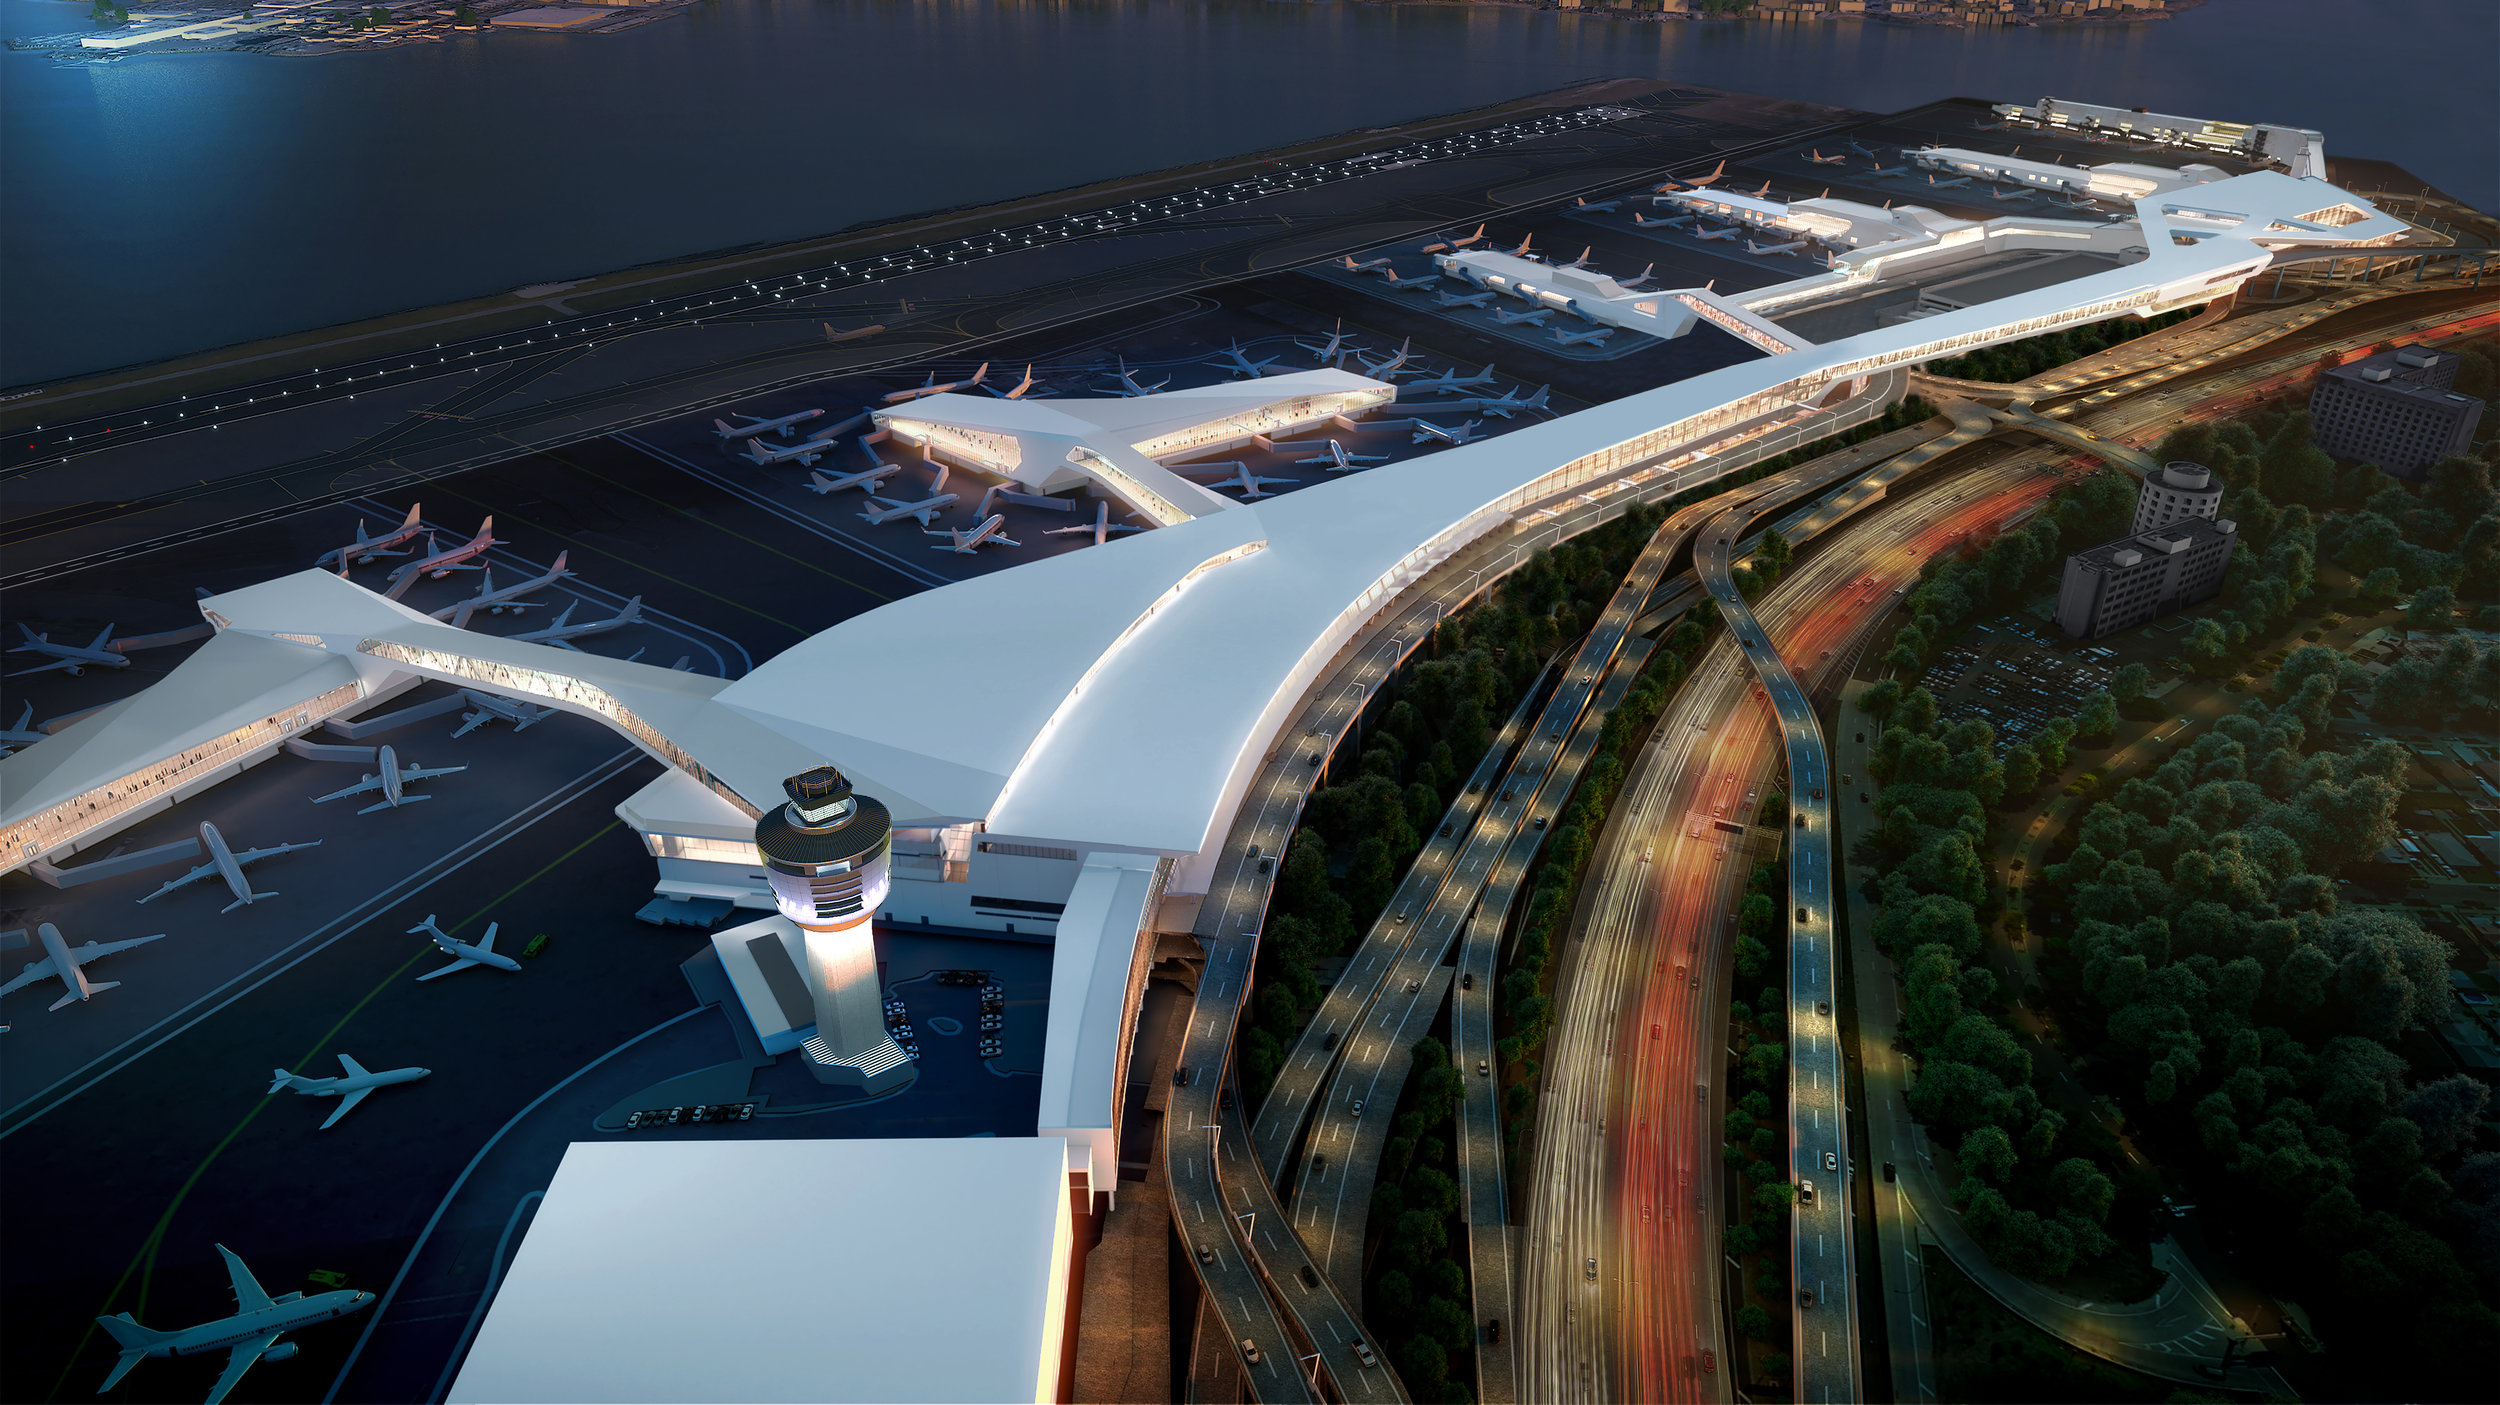 All part of a whole new, unified LaGuardia Airport